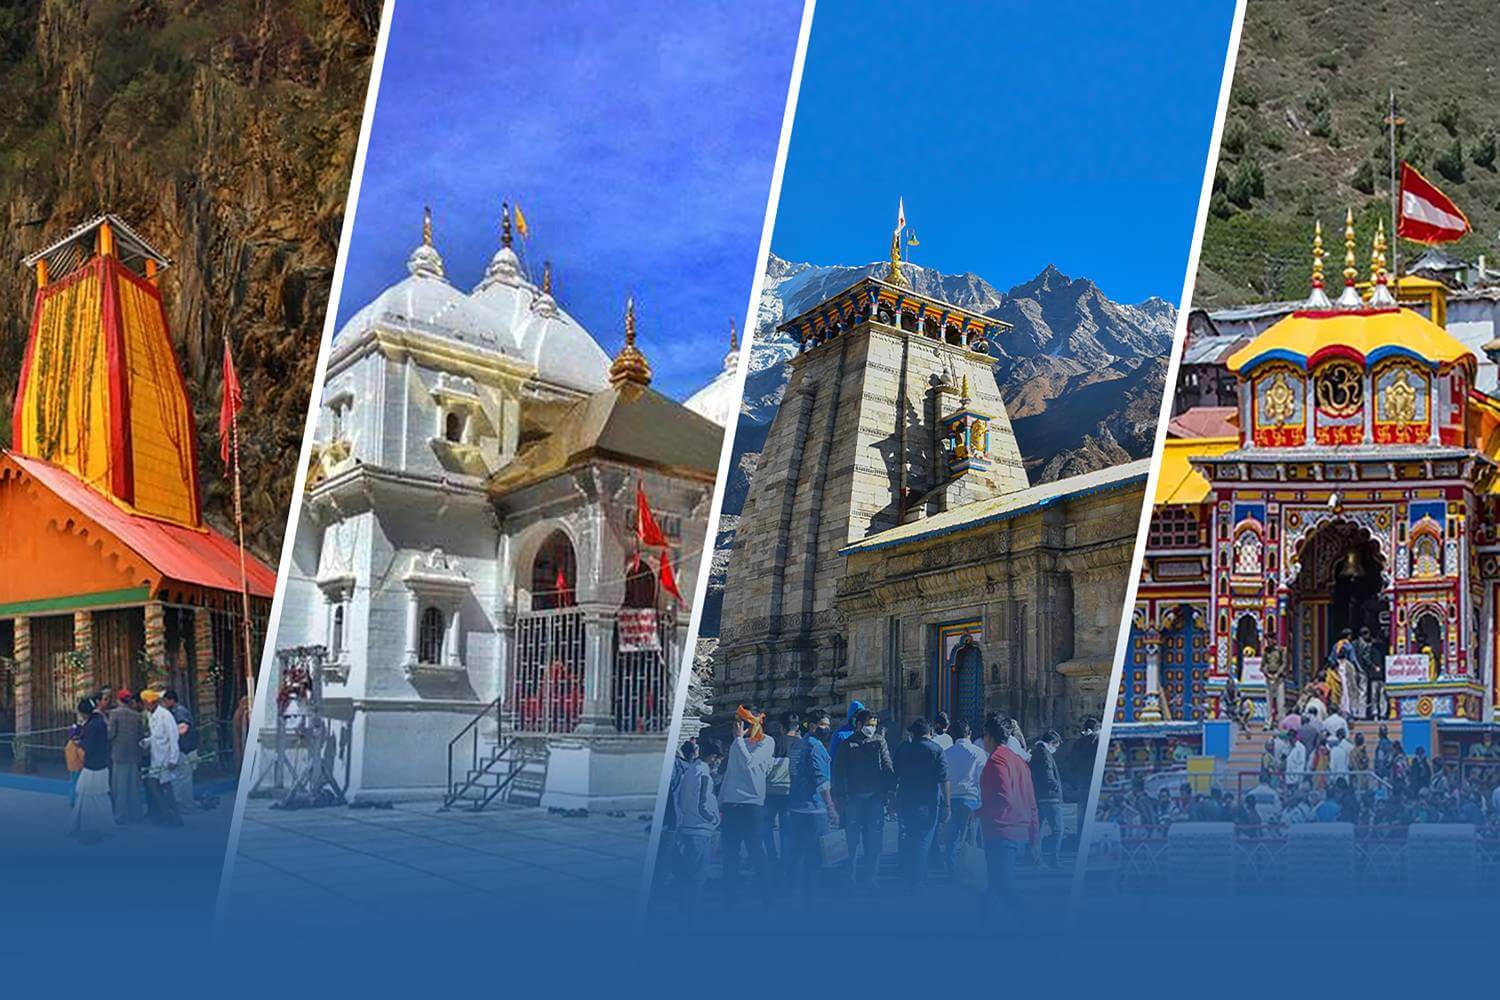 All About Char Dham: Char Dham Yatra in Uttarakhand – A Spiritual Sojourn